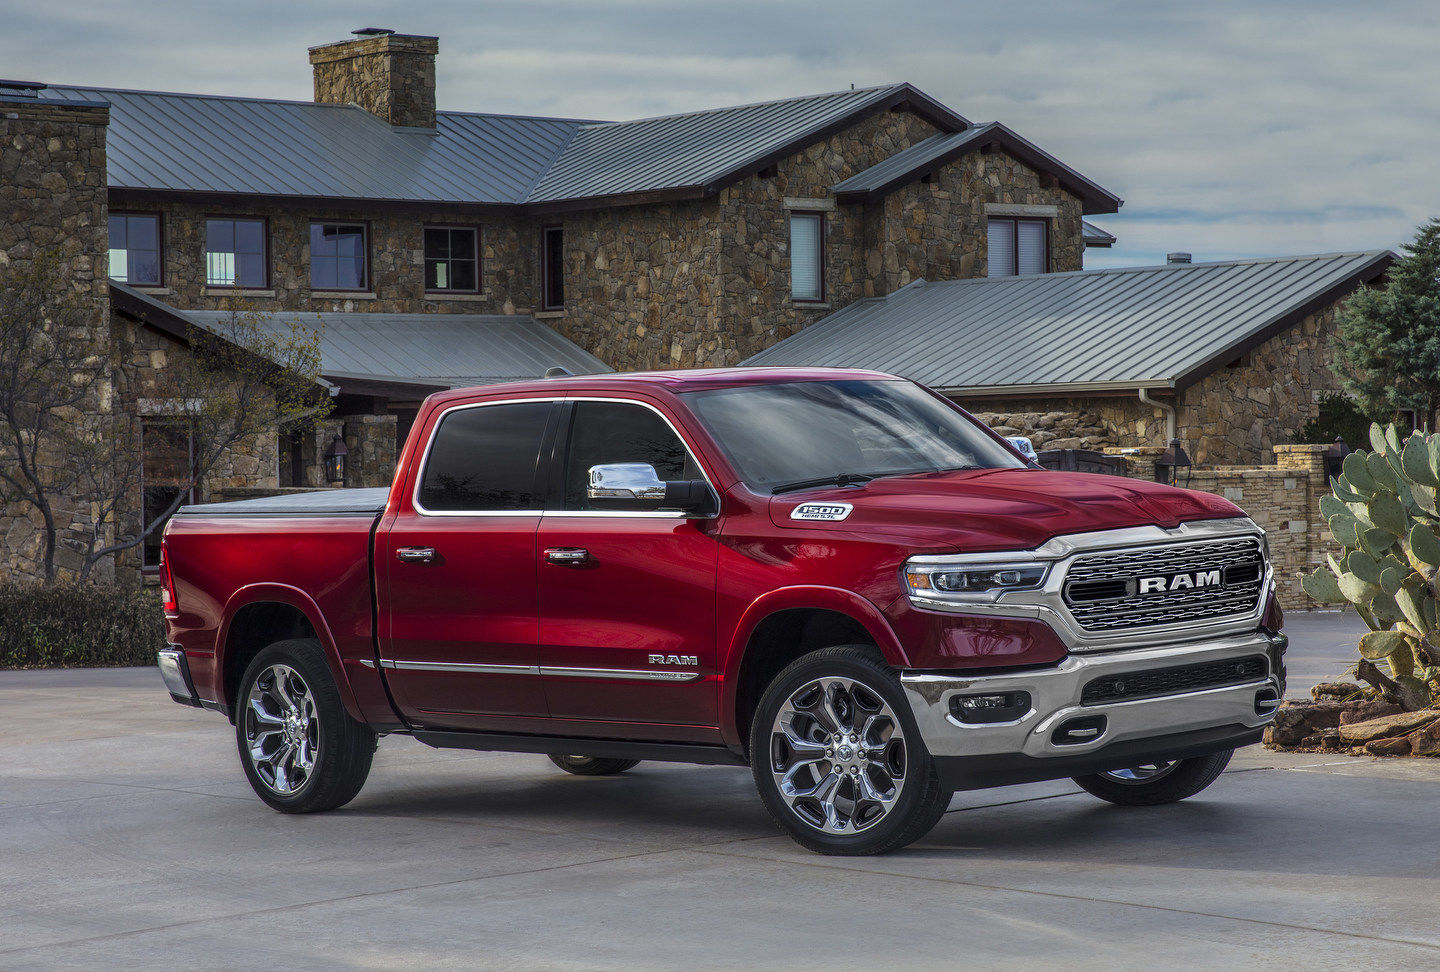 Frequently asked questions about the 2022 Ram 1500